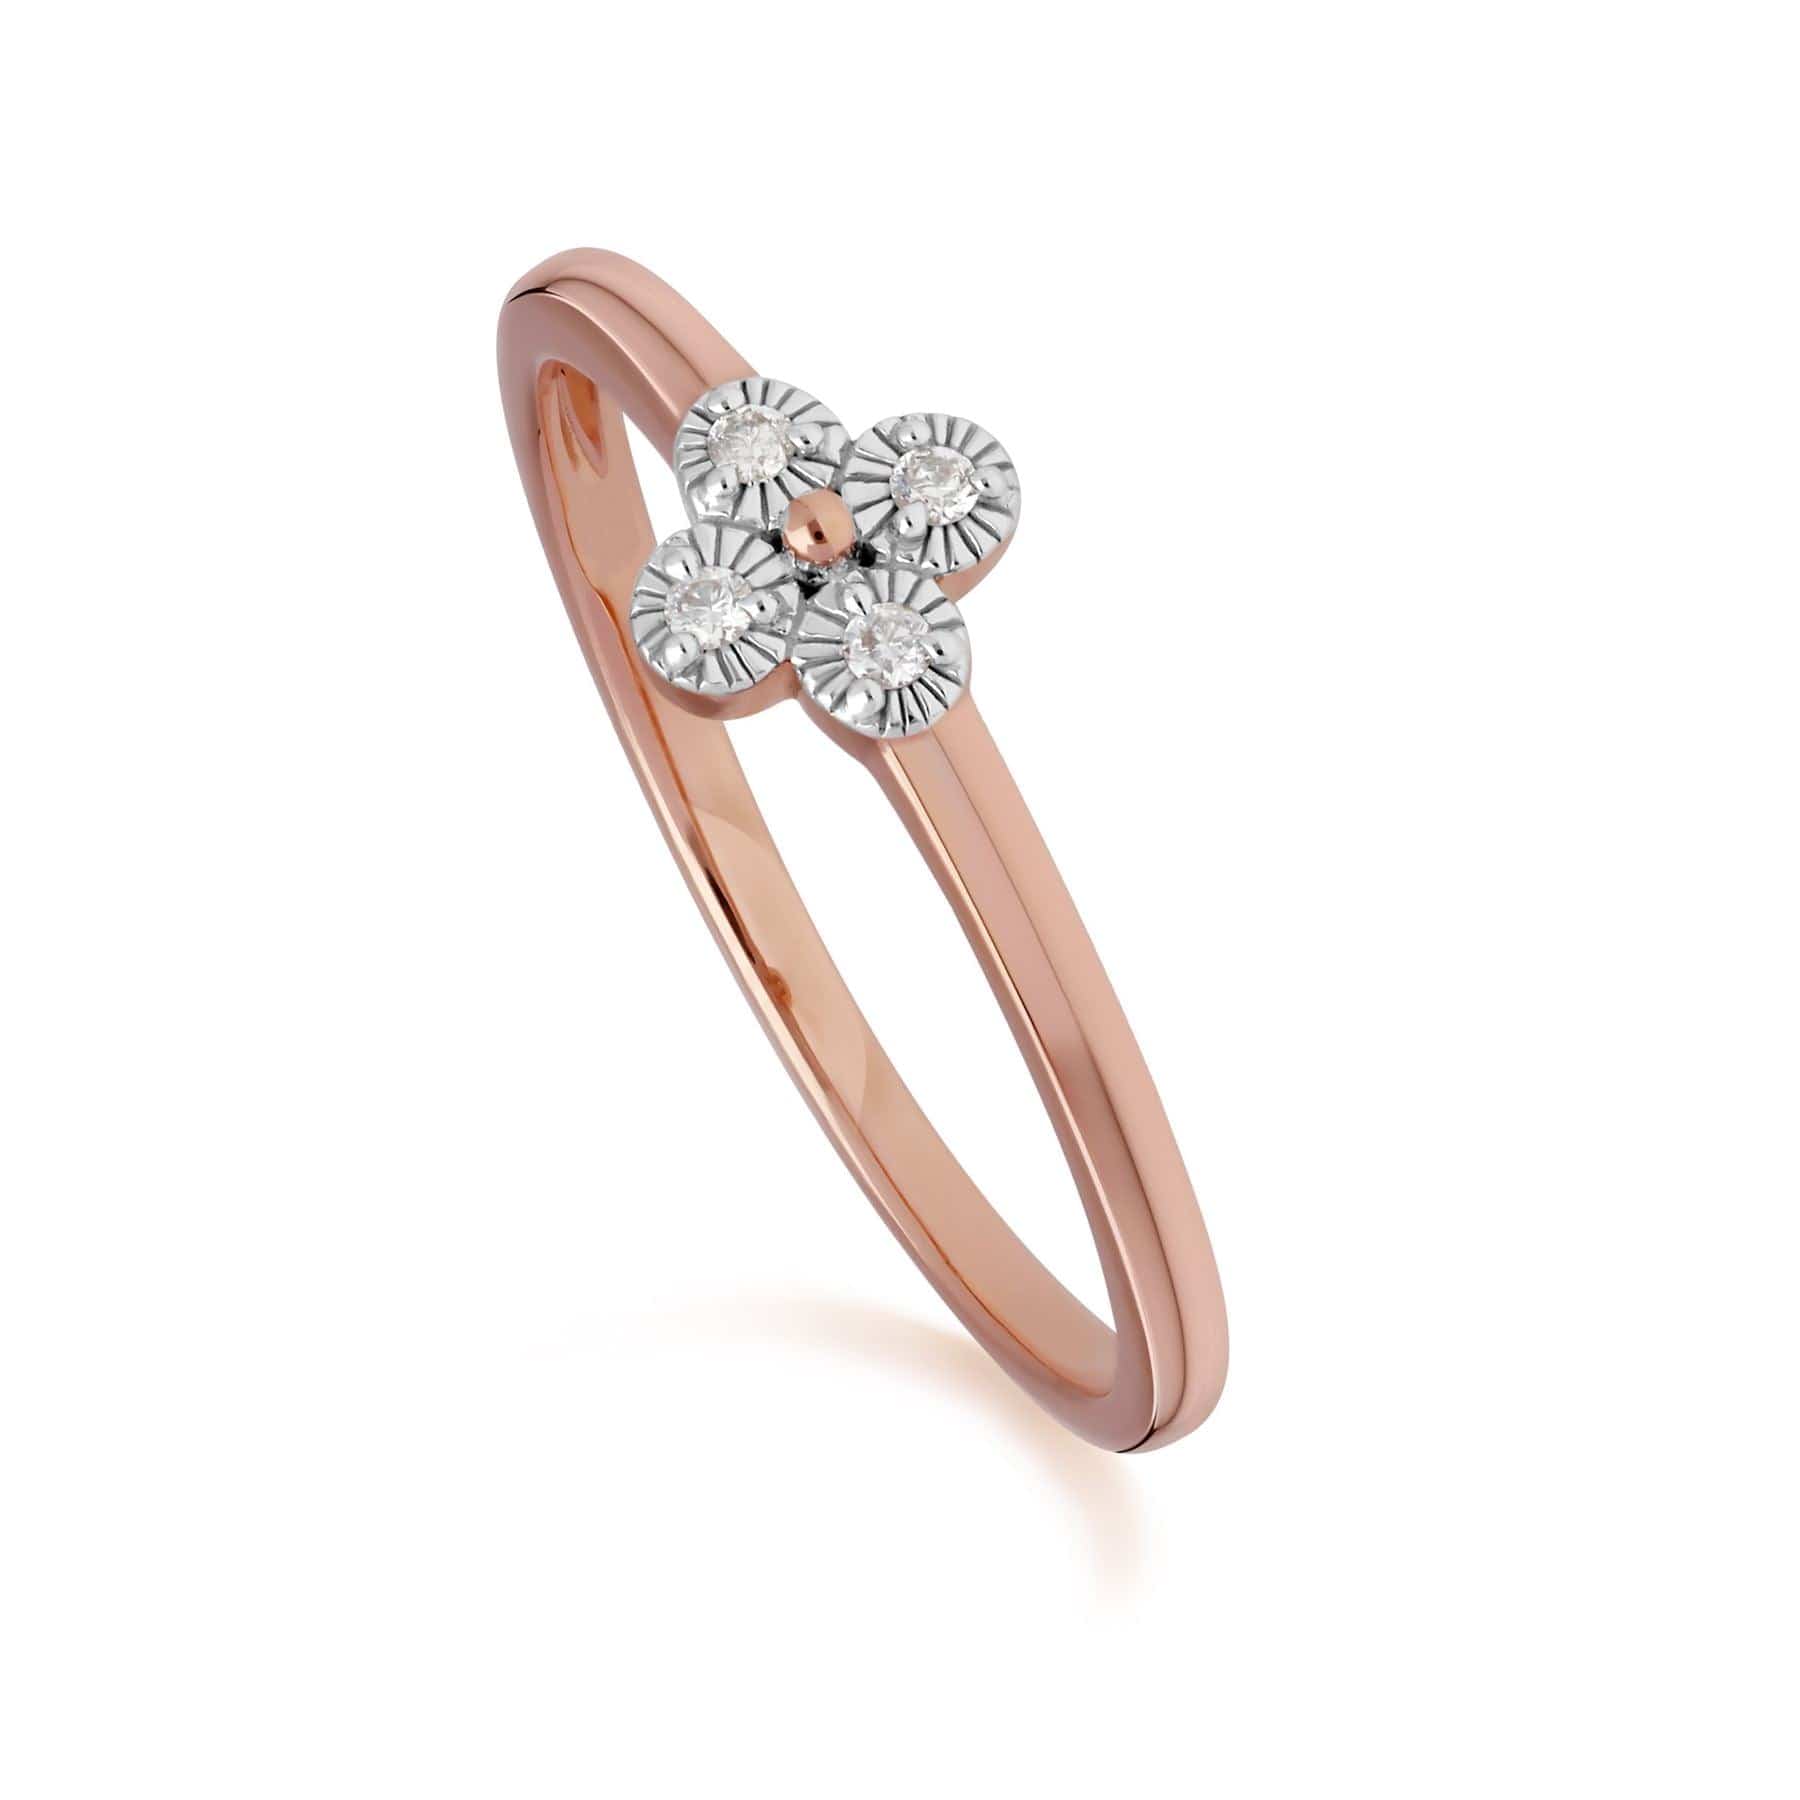 Image of Diamond Flowers Ring in 9ct Rose Gold